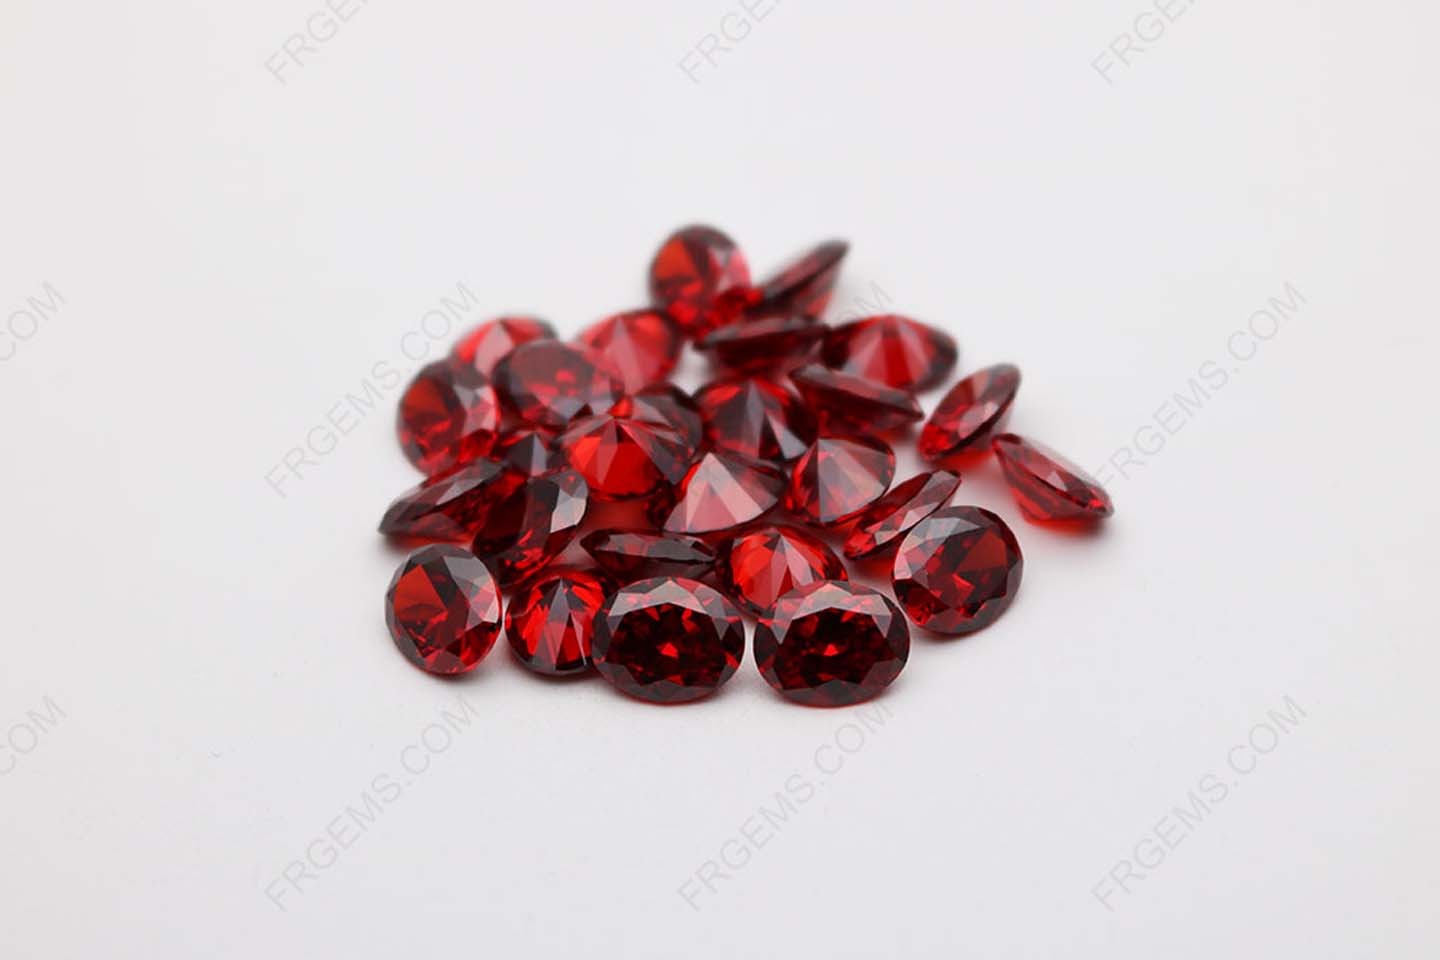 Cubic Zirconia Garnet Red Oval Shape Faceted cut 8x6mm stones CZ22 IMG_1244